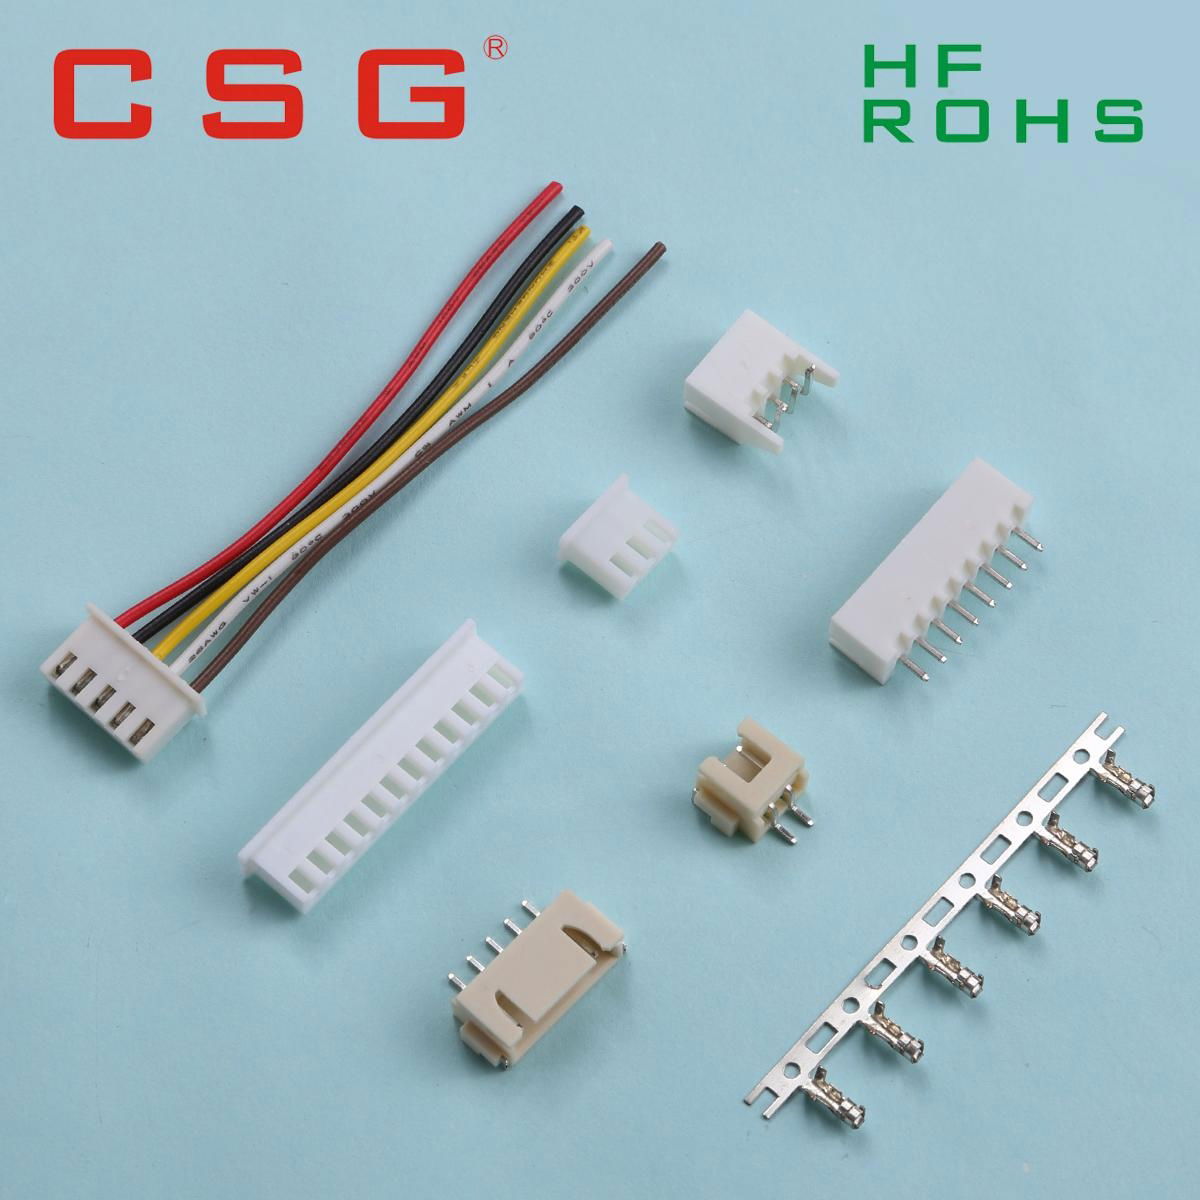 2.5mm pitch 6 pin connector wire harness 3